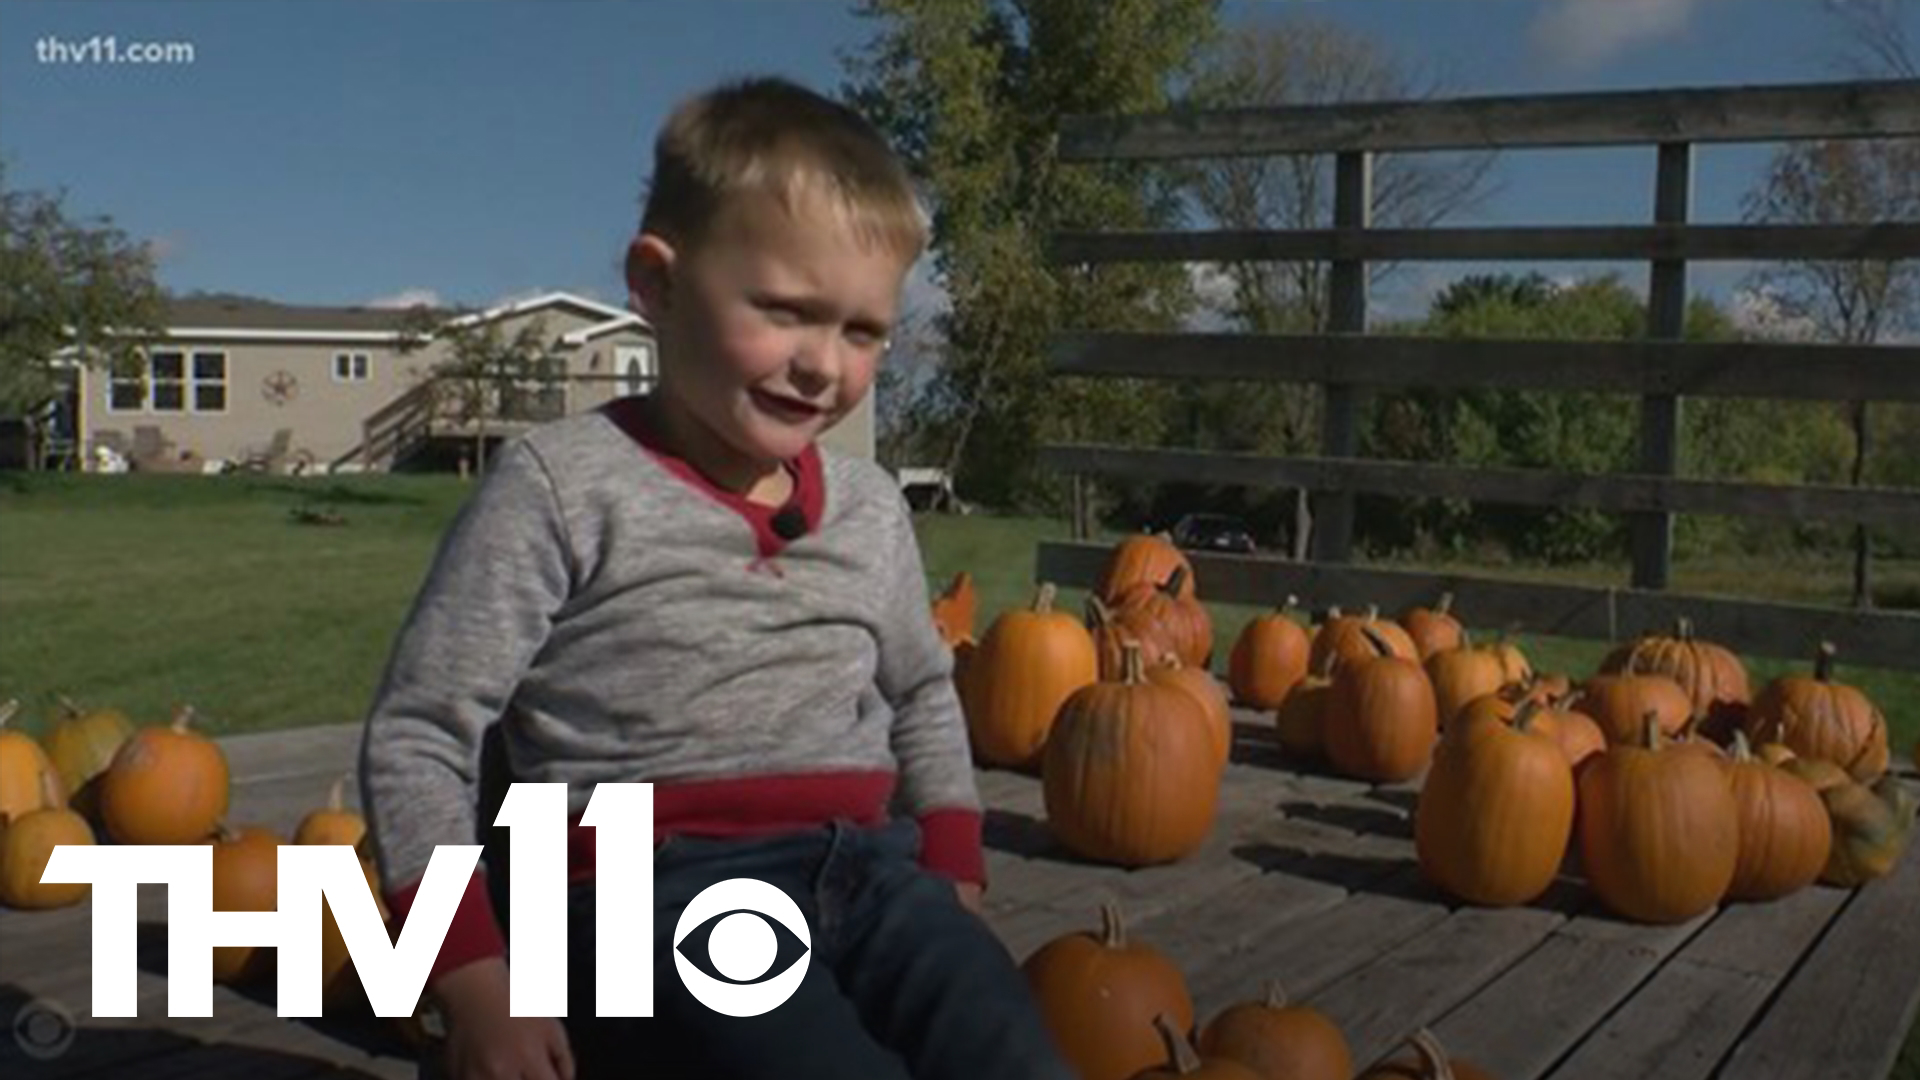 There's a 5-year-old getting into the Halloween spirit this morning. His story has three things: pumpkins, the honor system, and a generous heart.